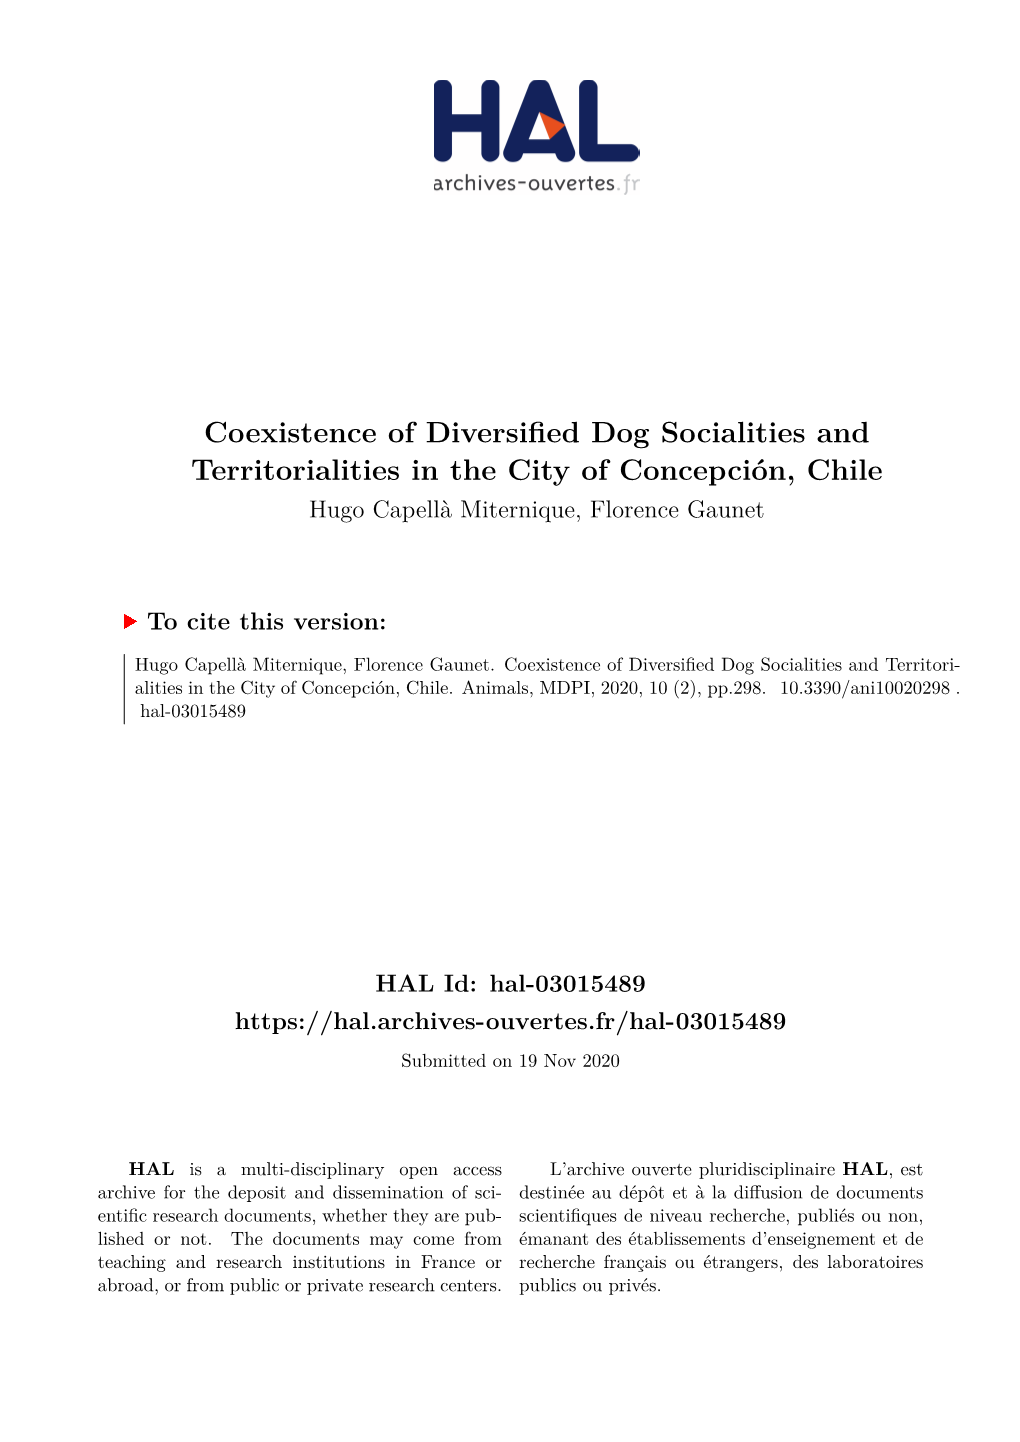 Coexistence of Diversified Dog Socialities and Territorialities in the City of Concepción, Chile Hugo Capellà Miternique, Florence Gaunet